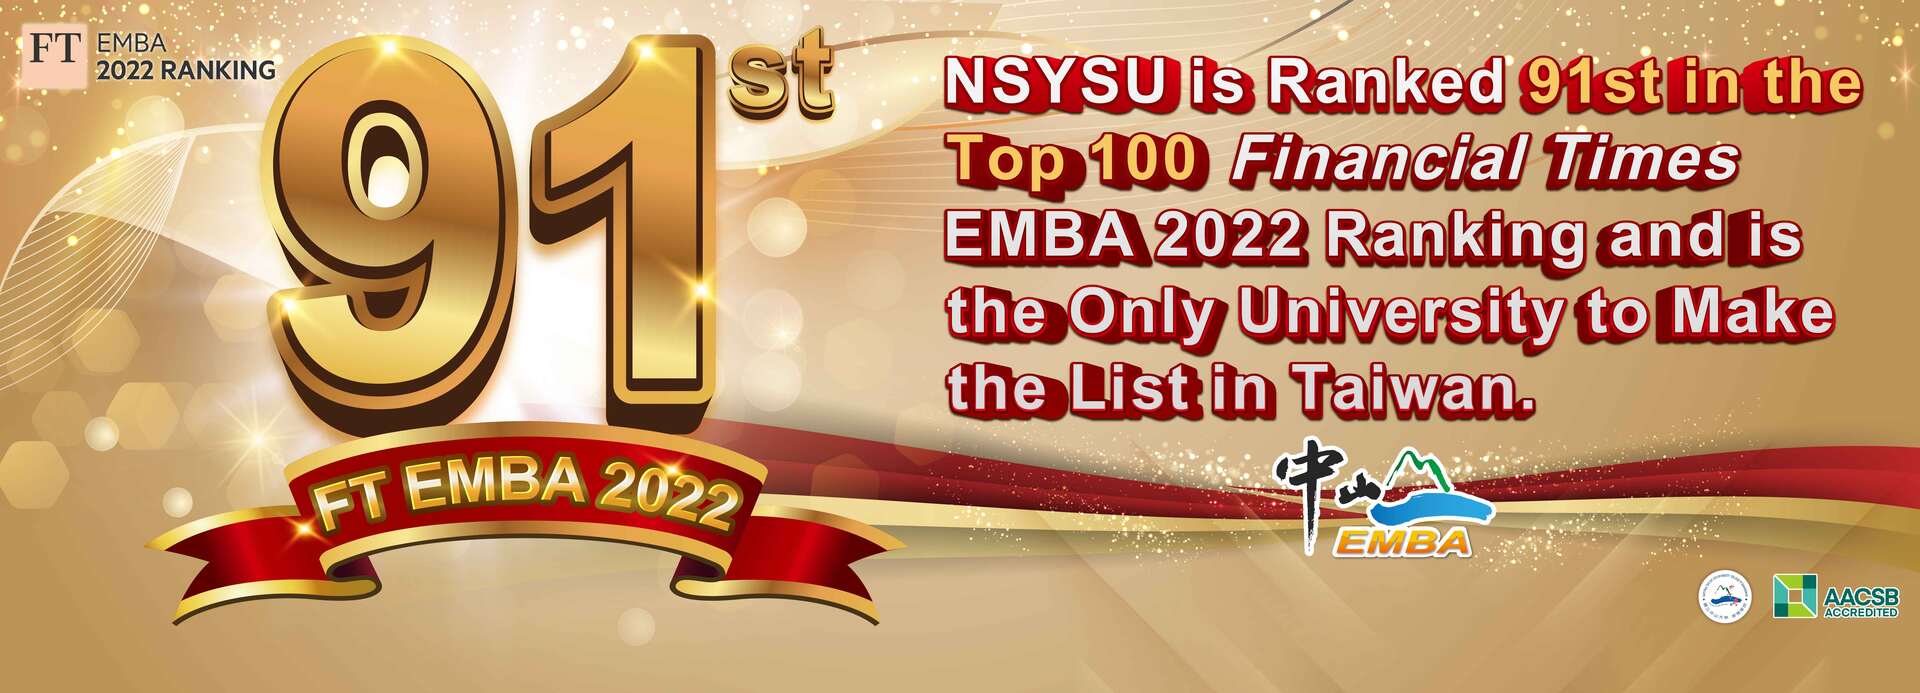 College Honors The Financial Times Global EMBA Ranking - The only EMBA in Taiwan to be ranked in the Top 100!